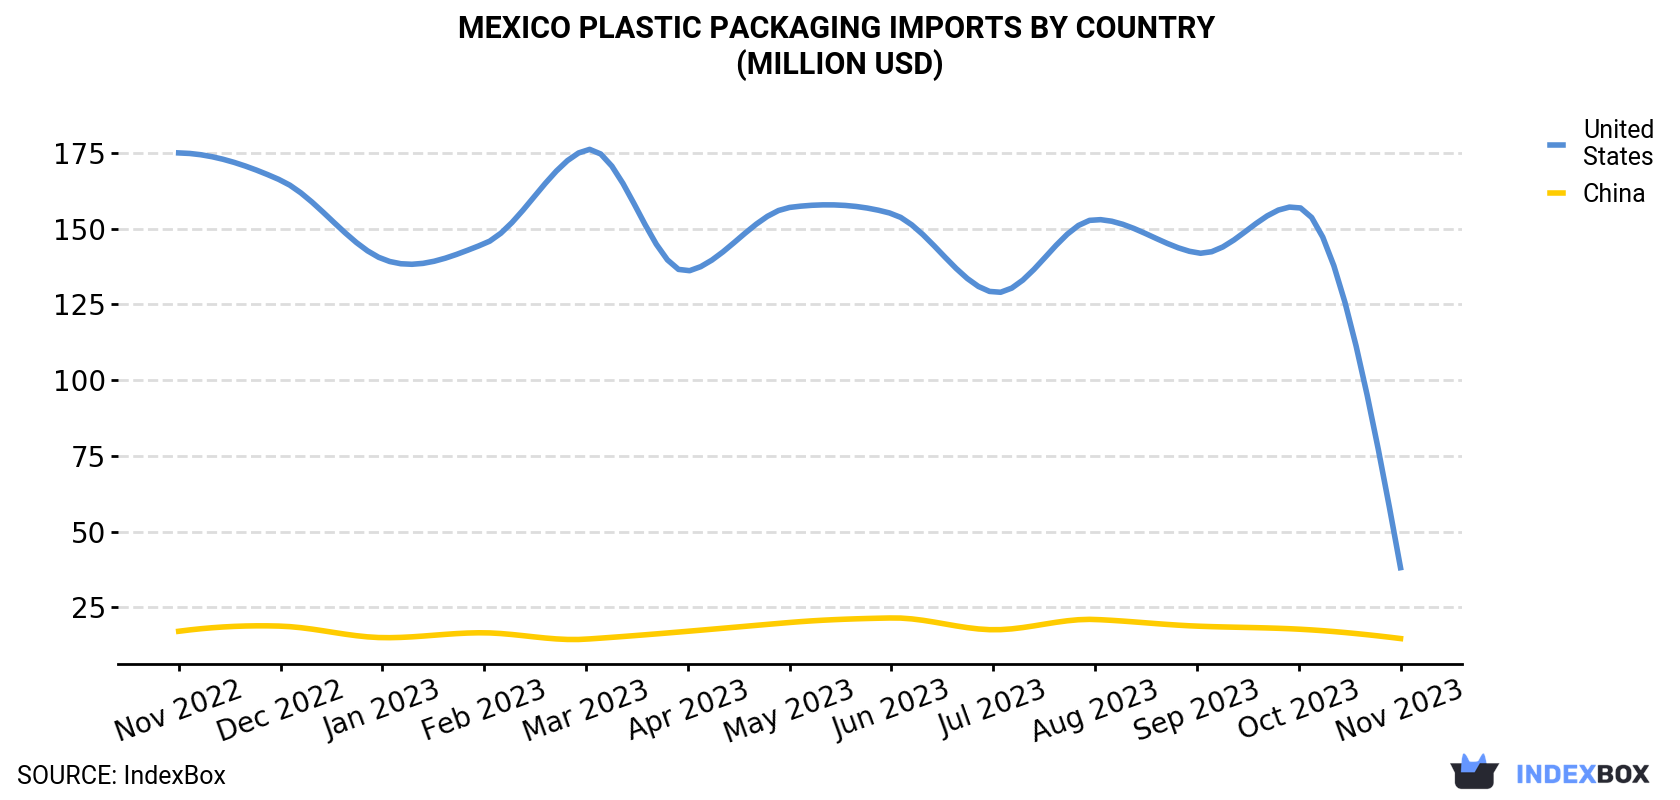 Mexico Plastic Packaging Imports By Country (Million USD)